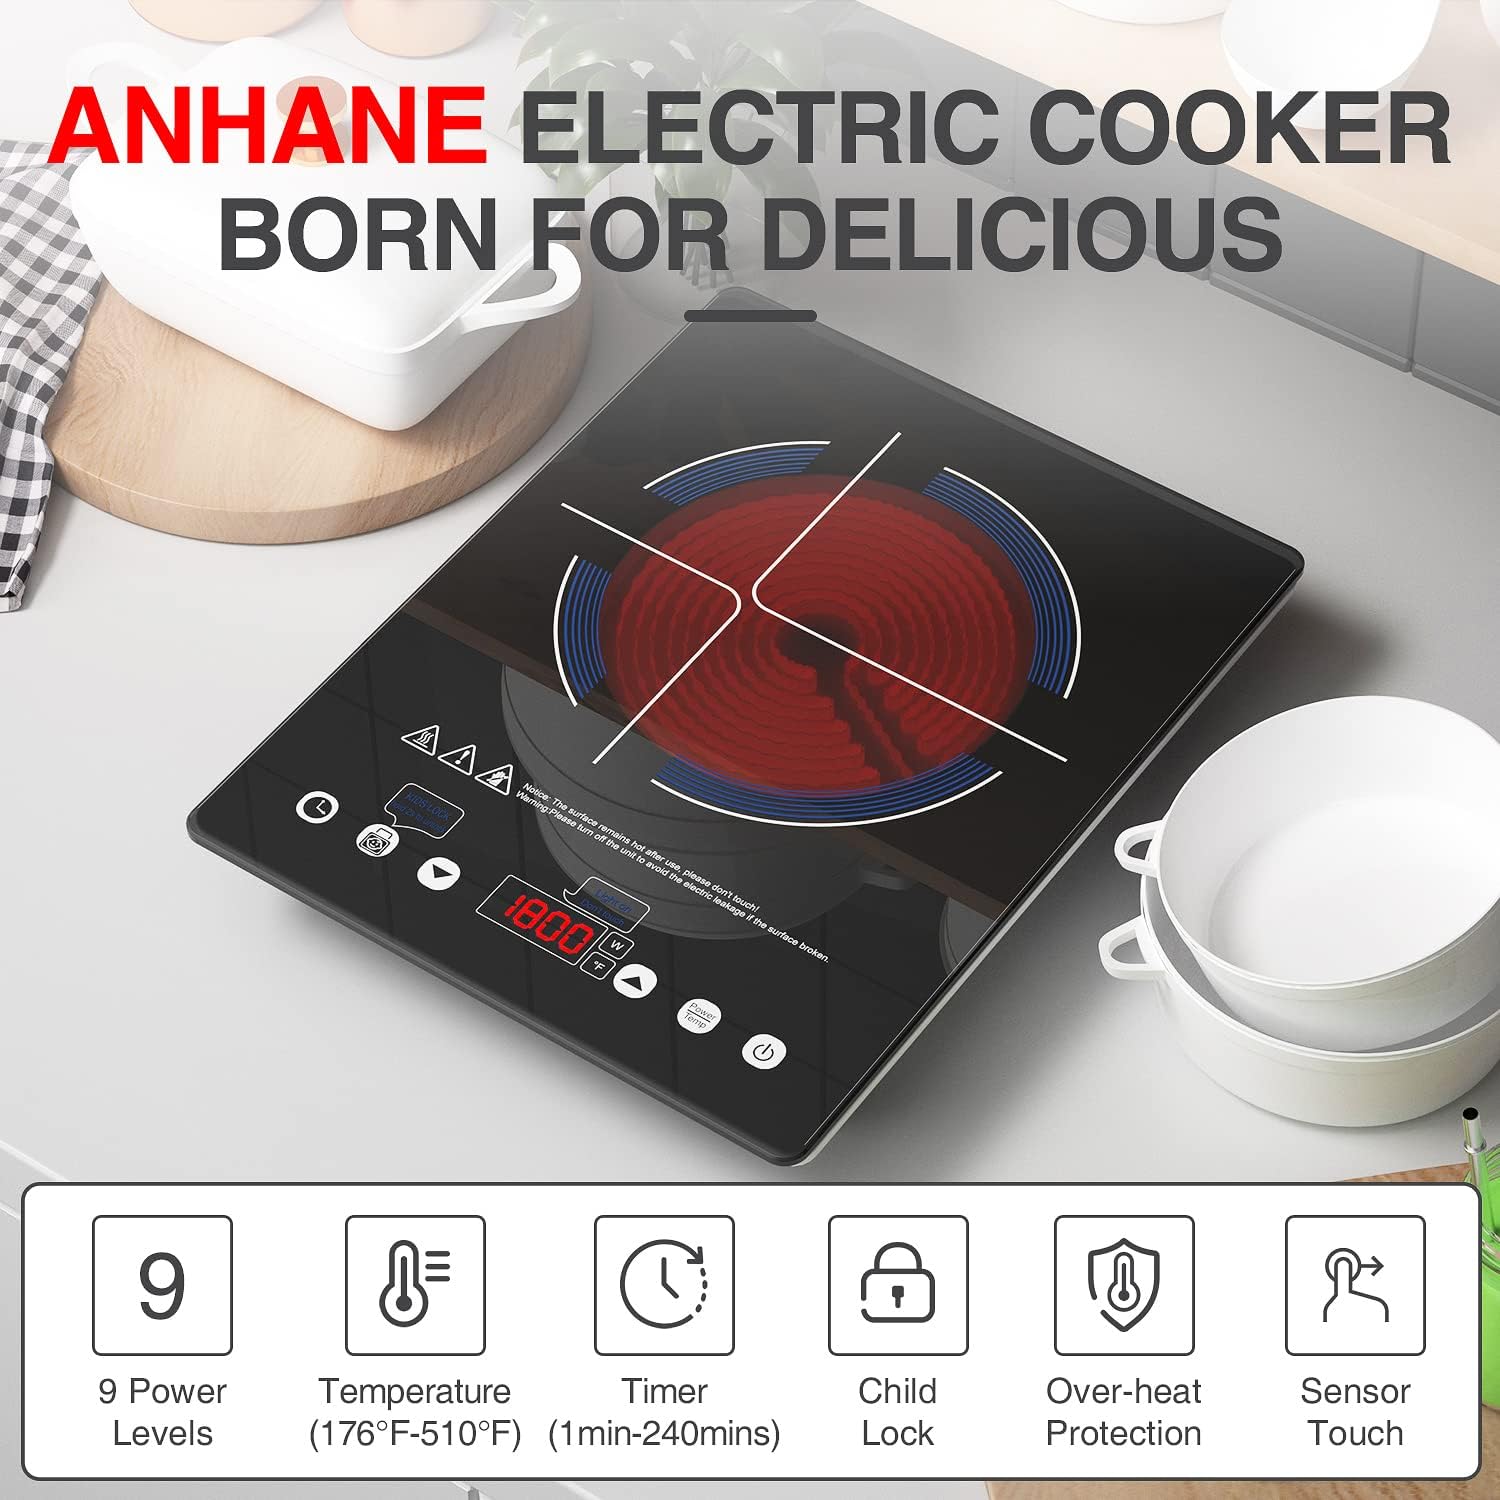 Generic ANHANE 1800W Electric Hot Plate Single Burner,Portable Electric Stove for Cooking,Infrared Burner,4-Hour Setting,Black Crystal